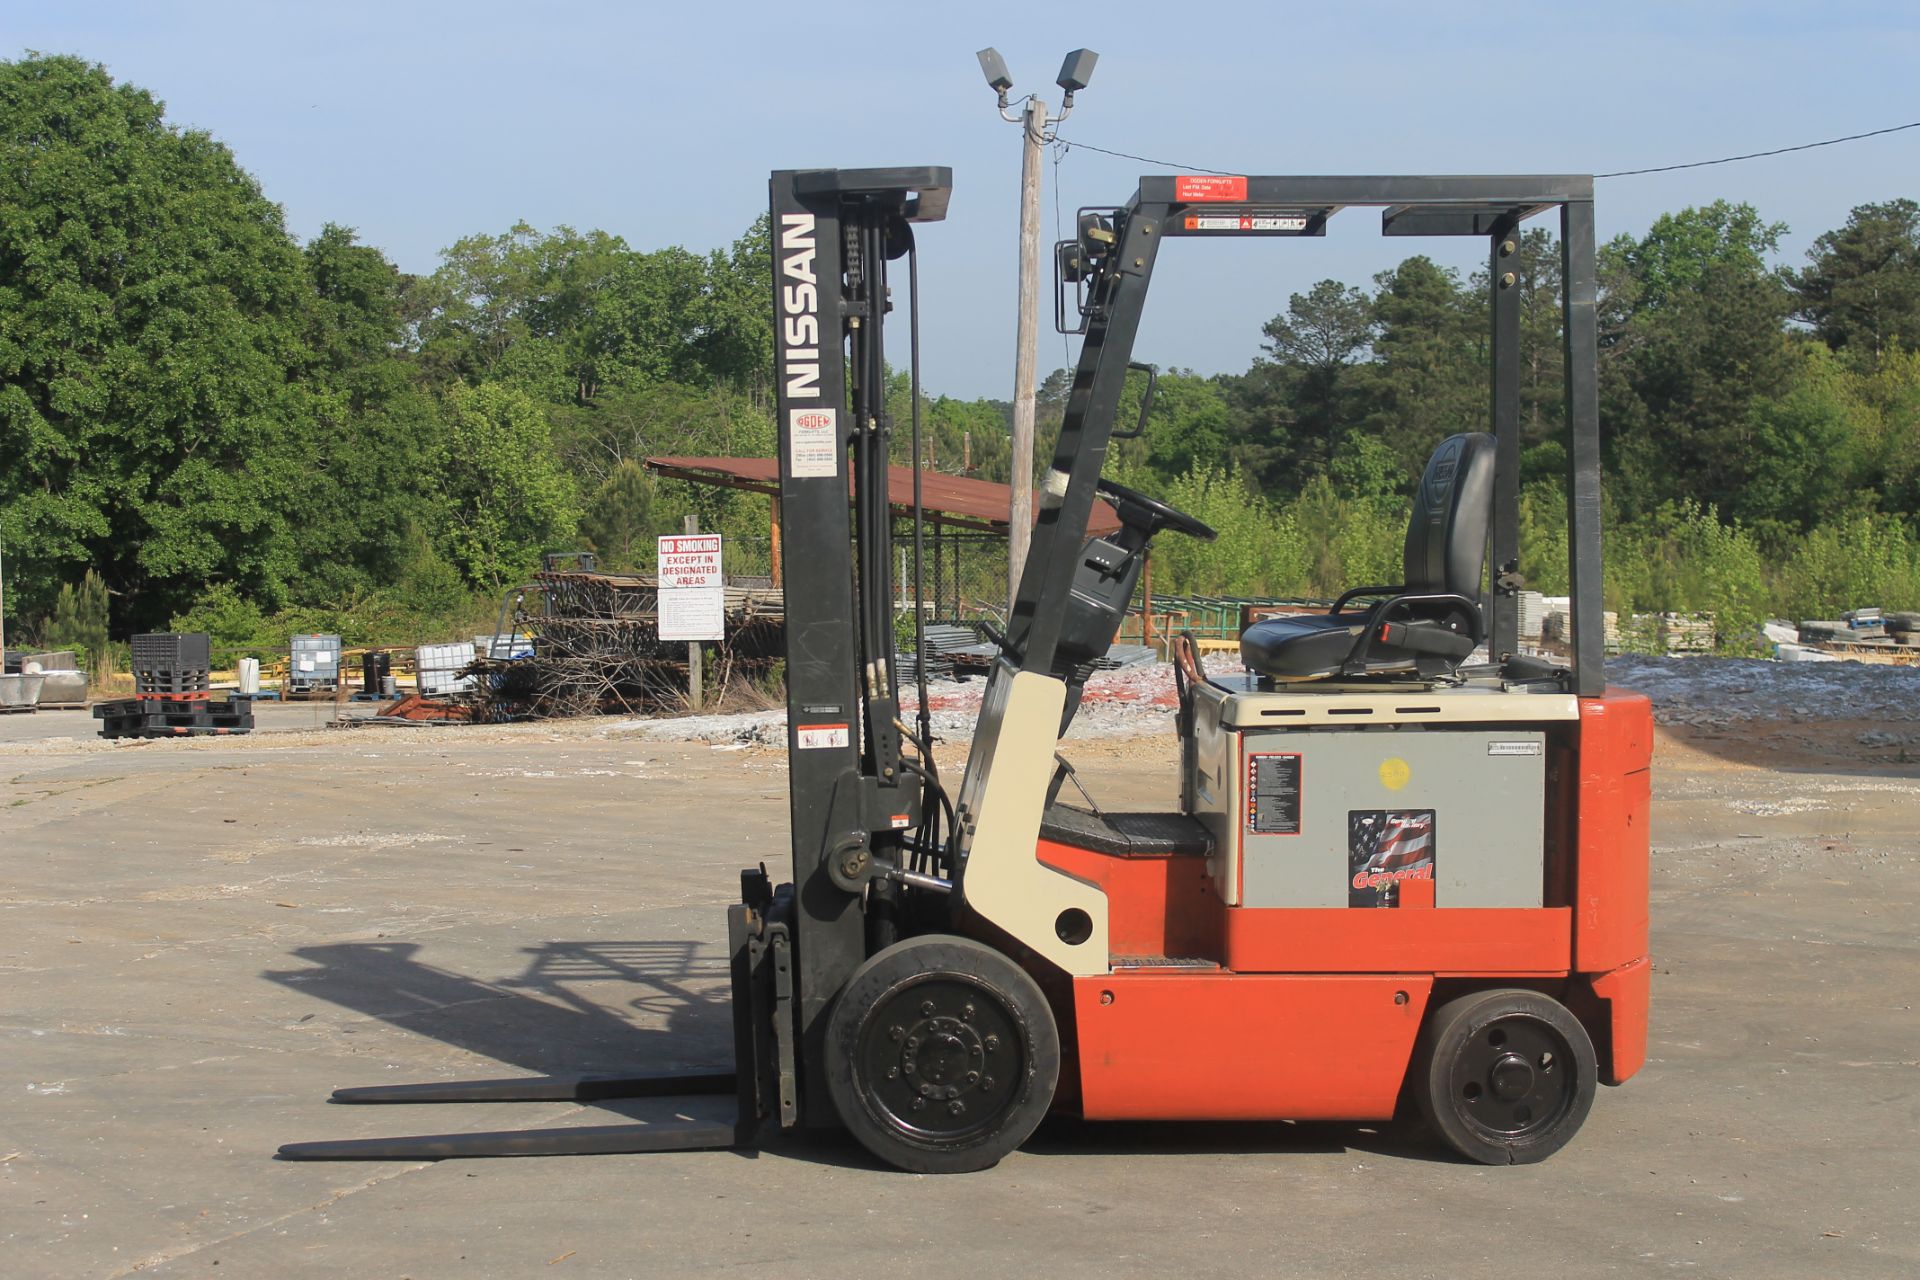 2005 NISSAN ELECTRIC FORKLIFT WITH 2014 BATTERY 4000 CAPACITY (WATCH VIDEO)